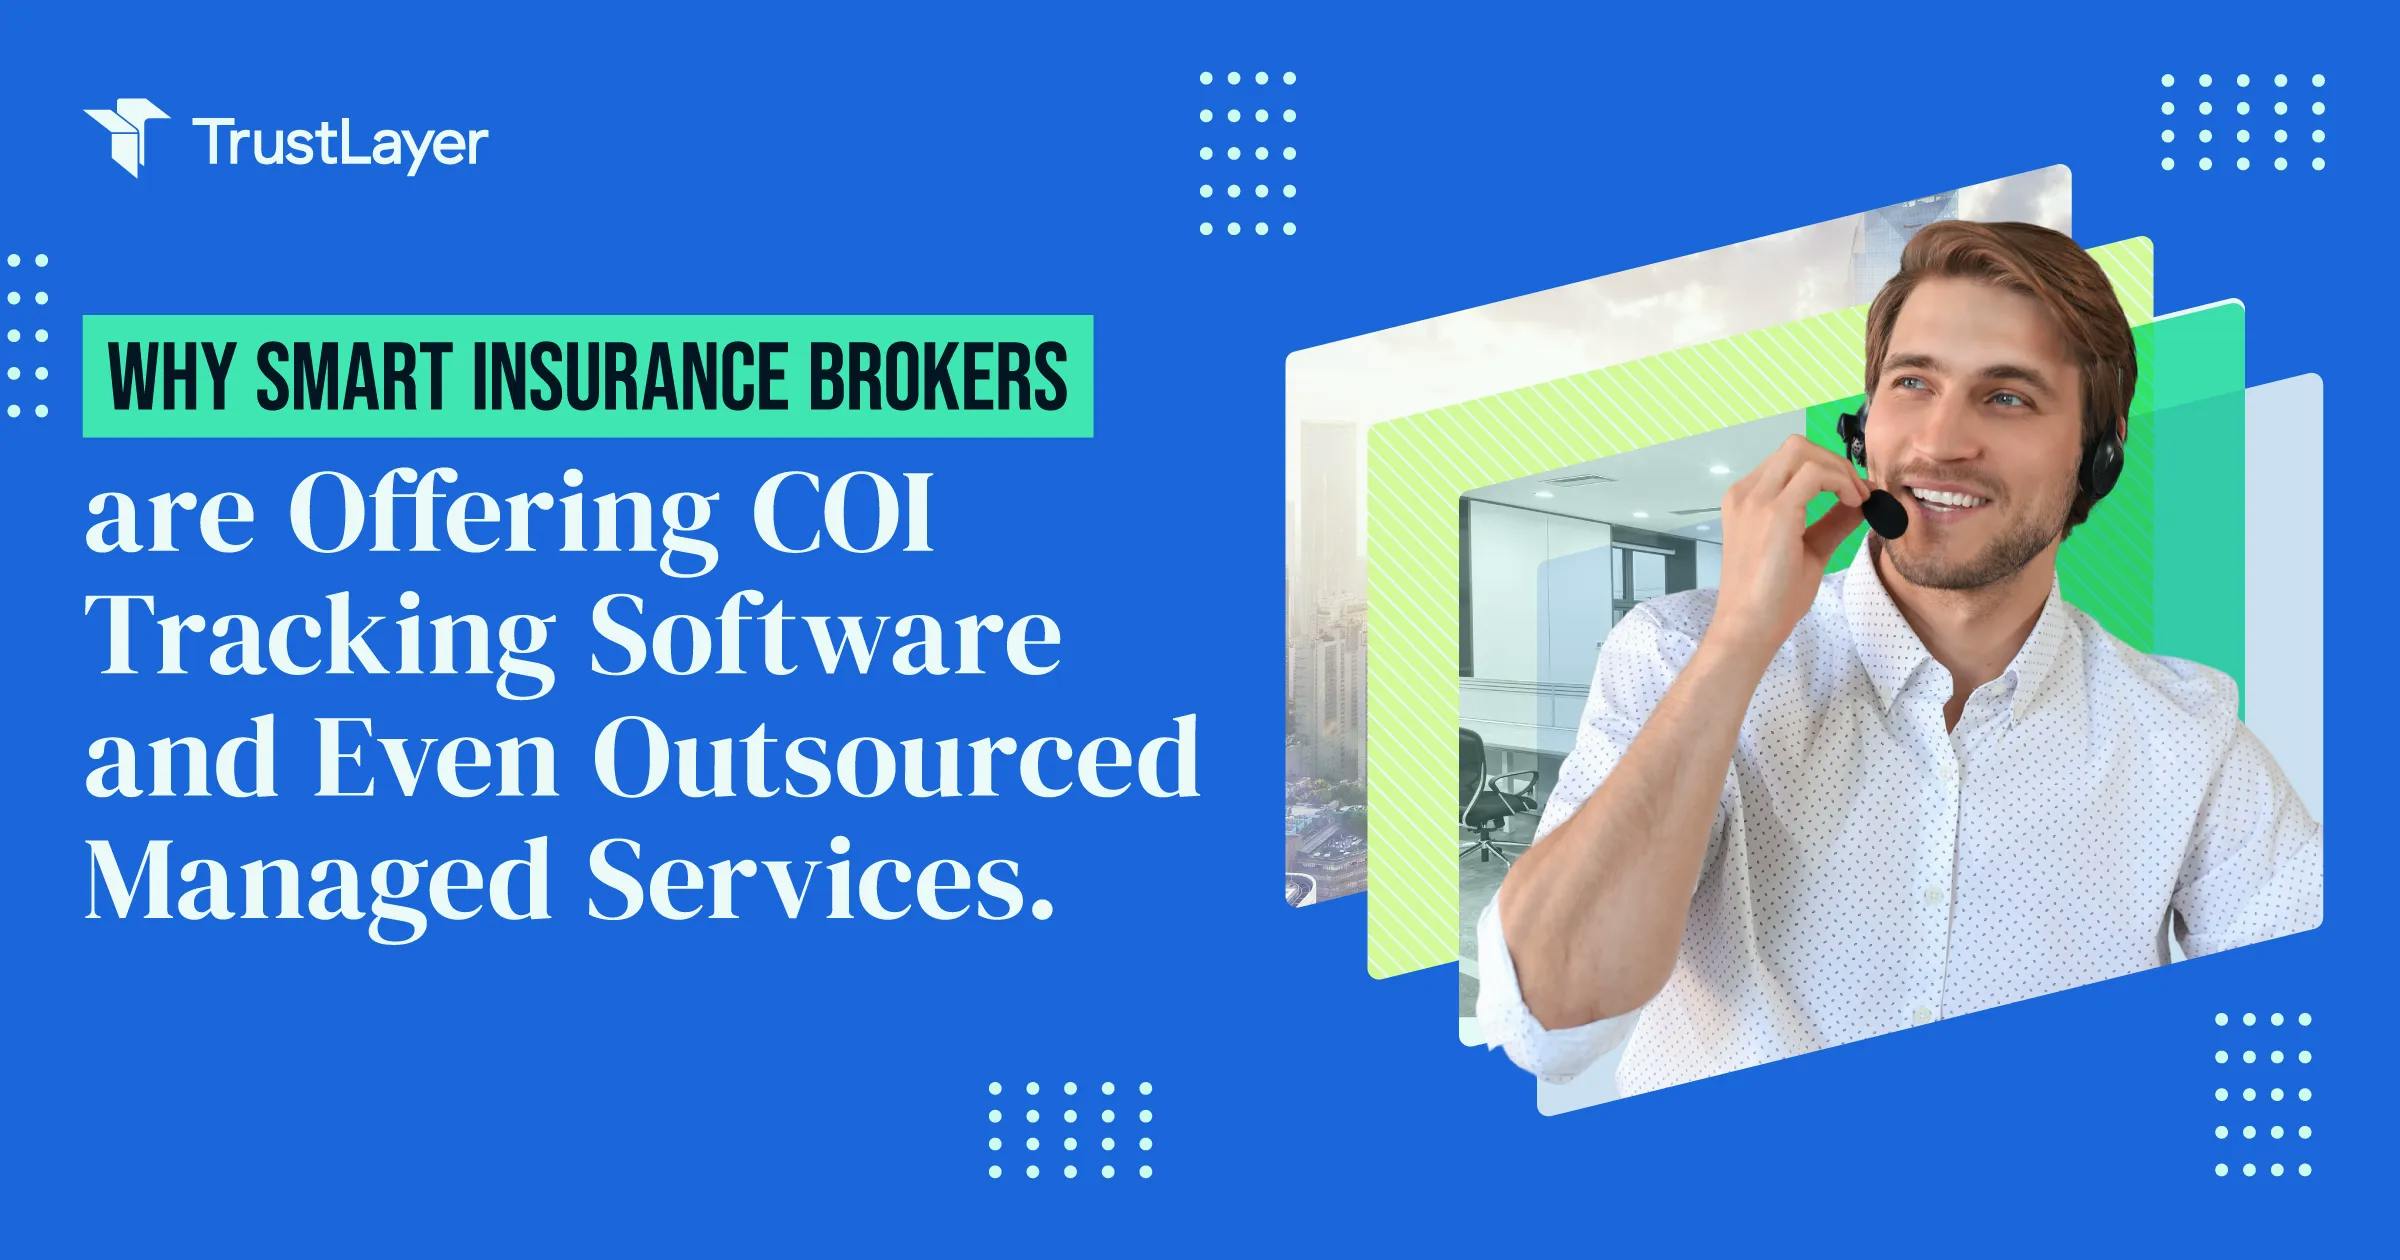 Why Smart Insurance Brokers are Offering COI Tracking Software and Even Outsourced Managed Services